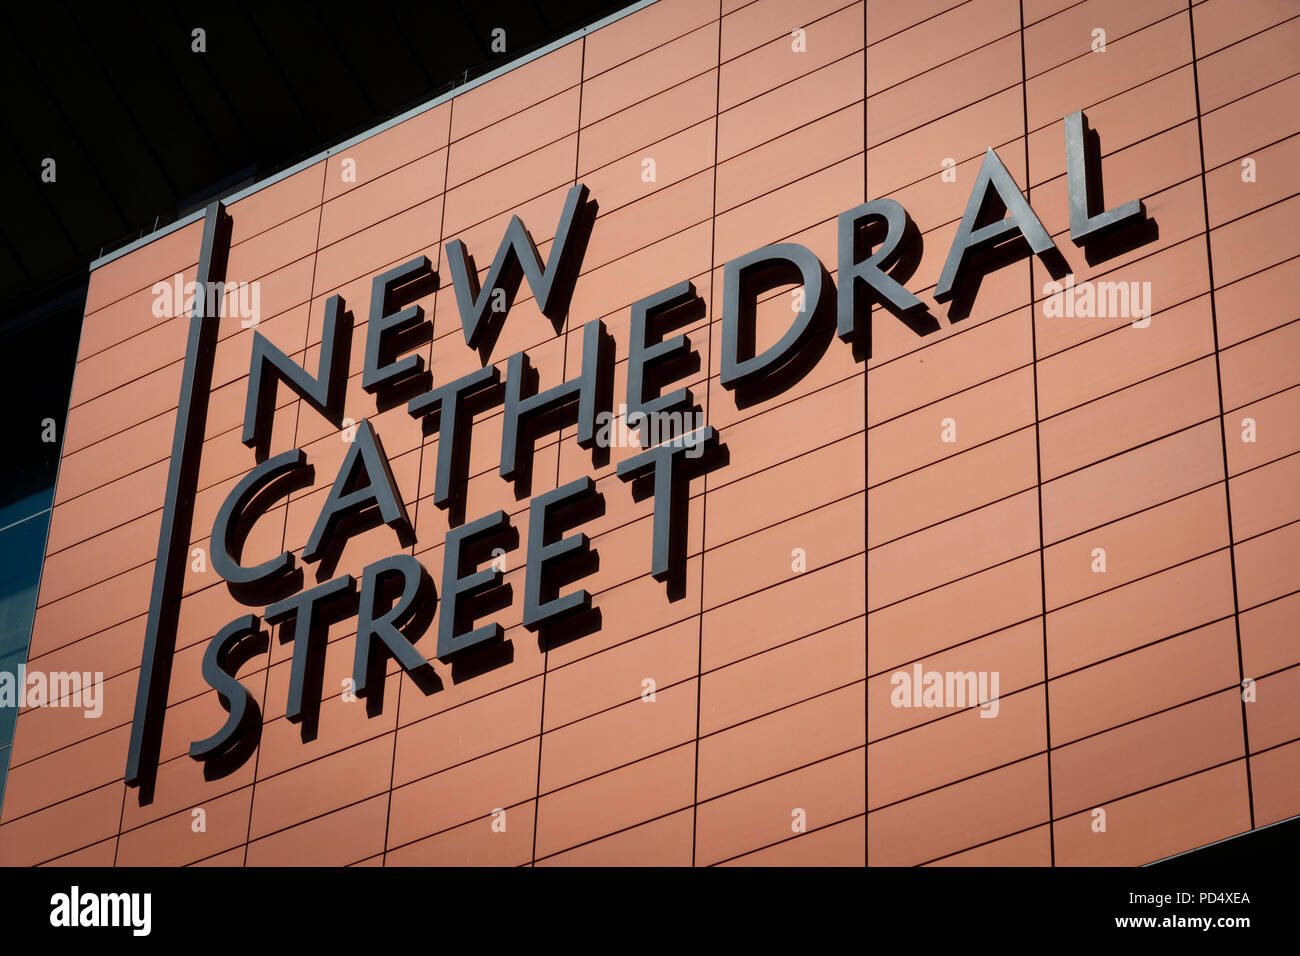 New Cathedral Street sign in Manchester City centre Stock Photo